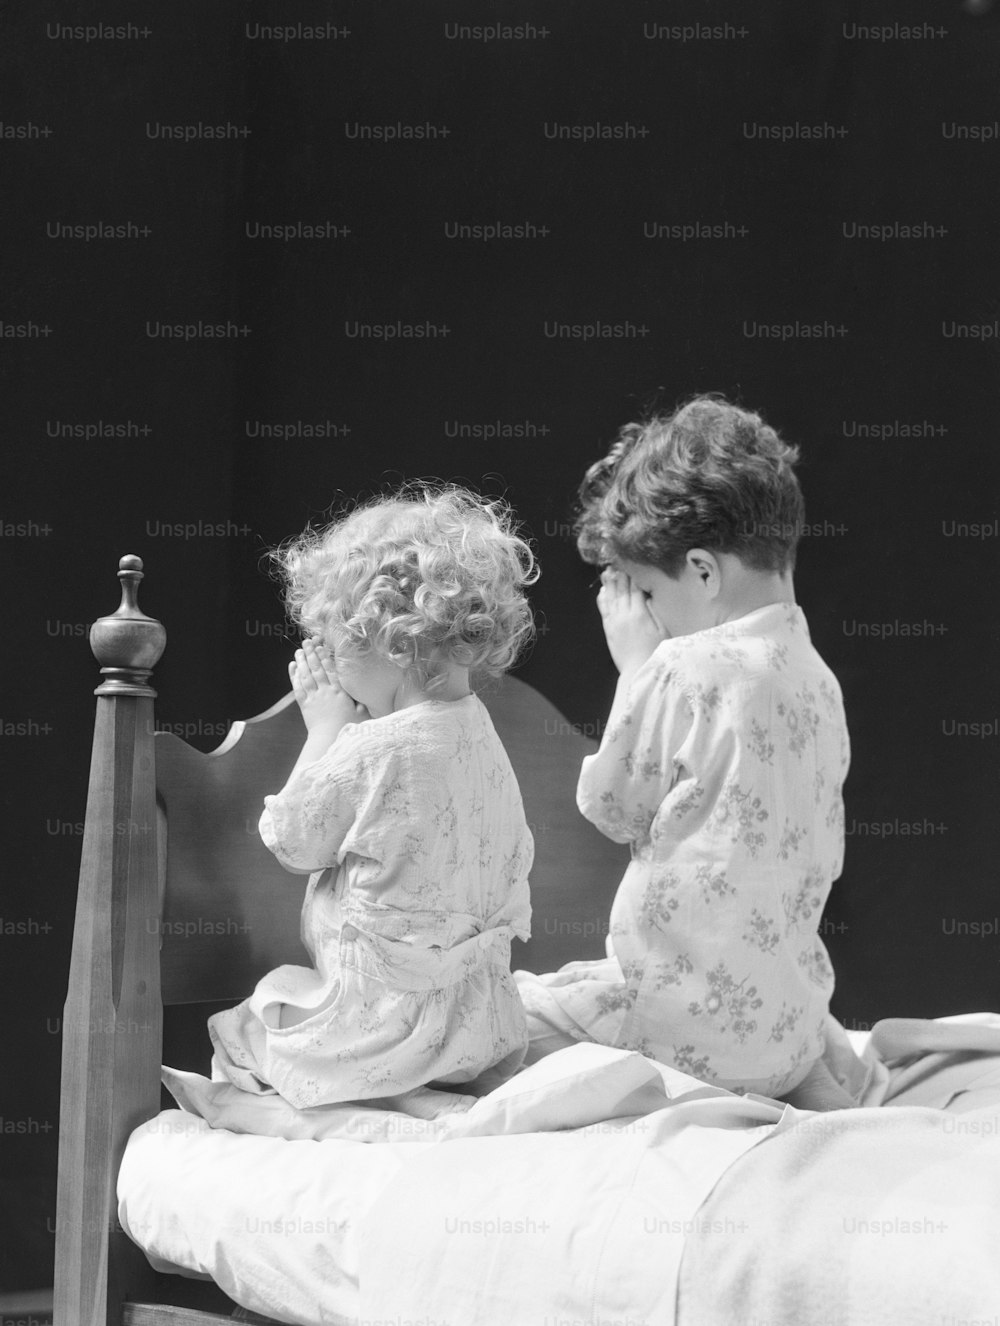 UNITED STATES - CIRCA 1930s:  Boy and girl kneeling by bed praying, rear view.